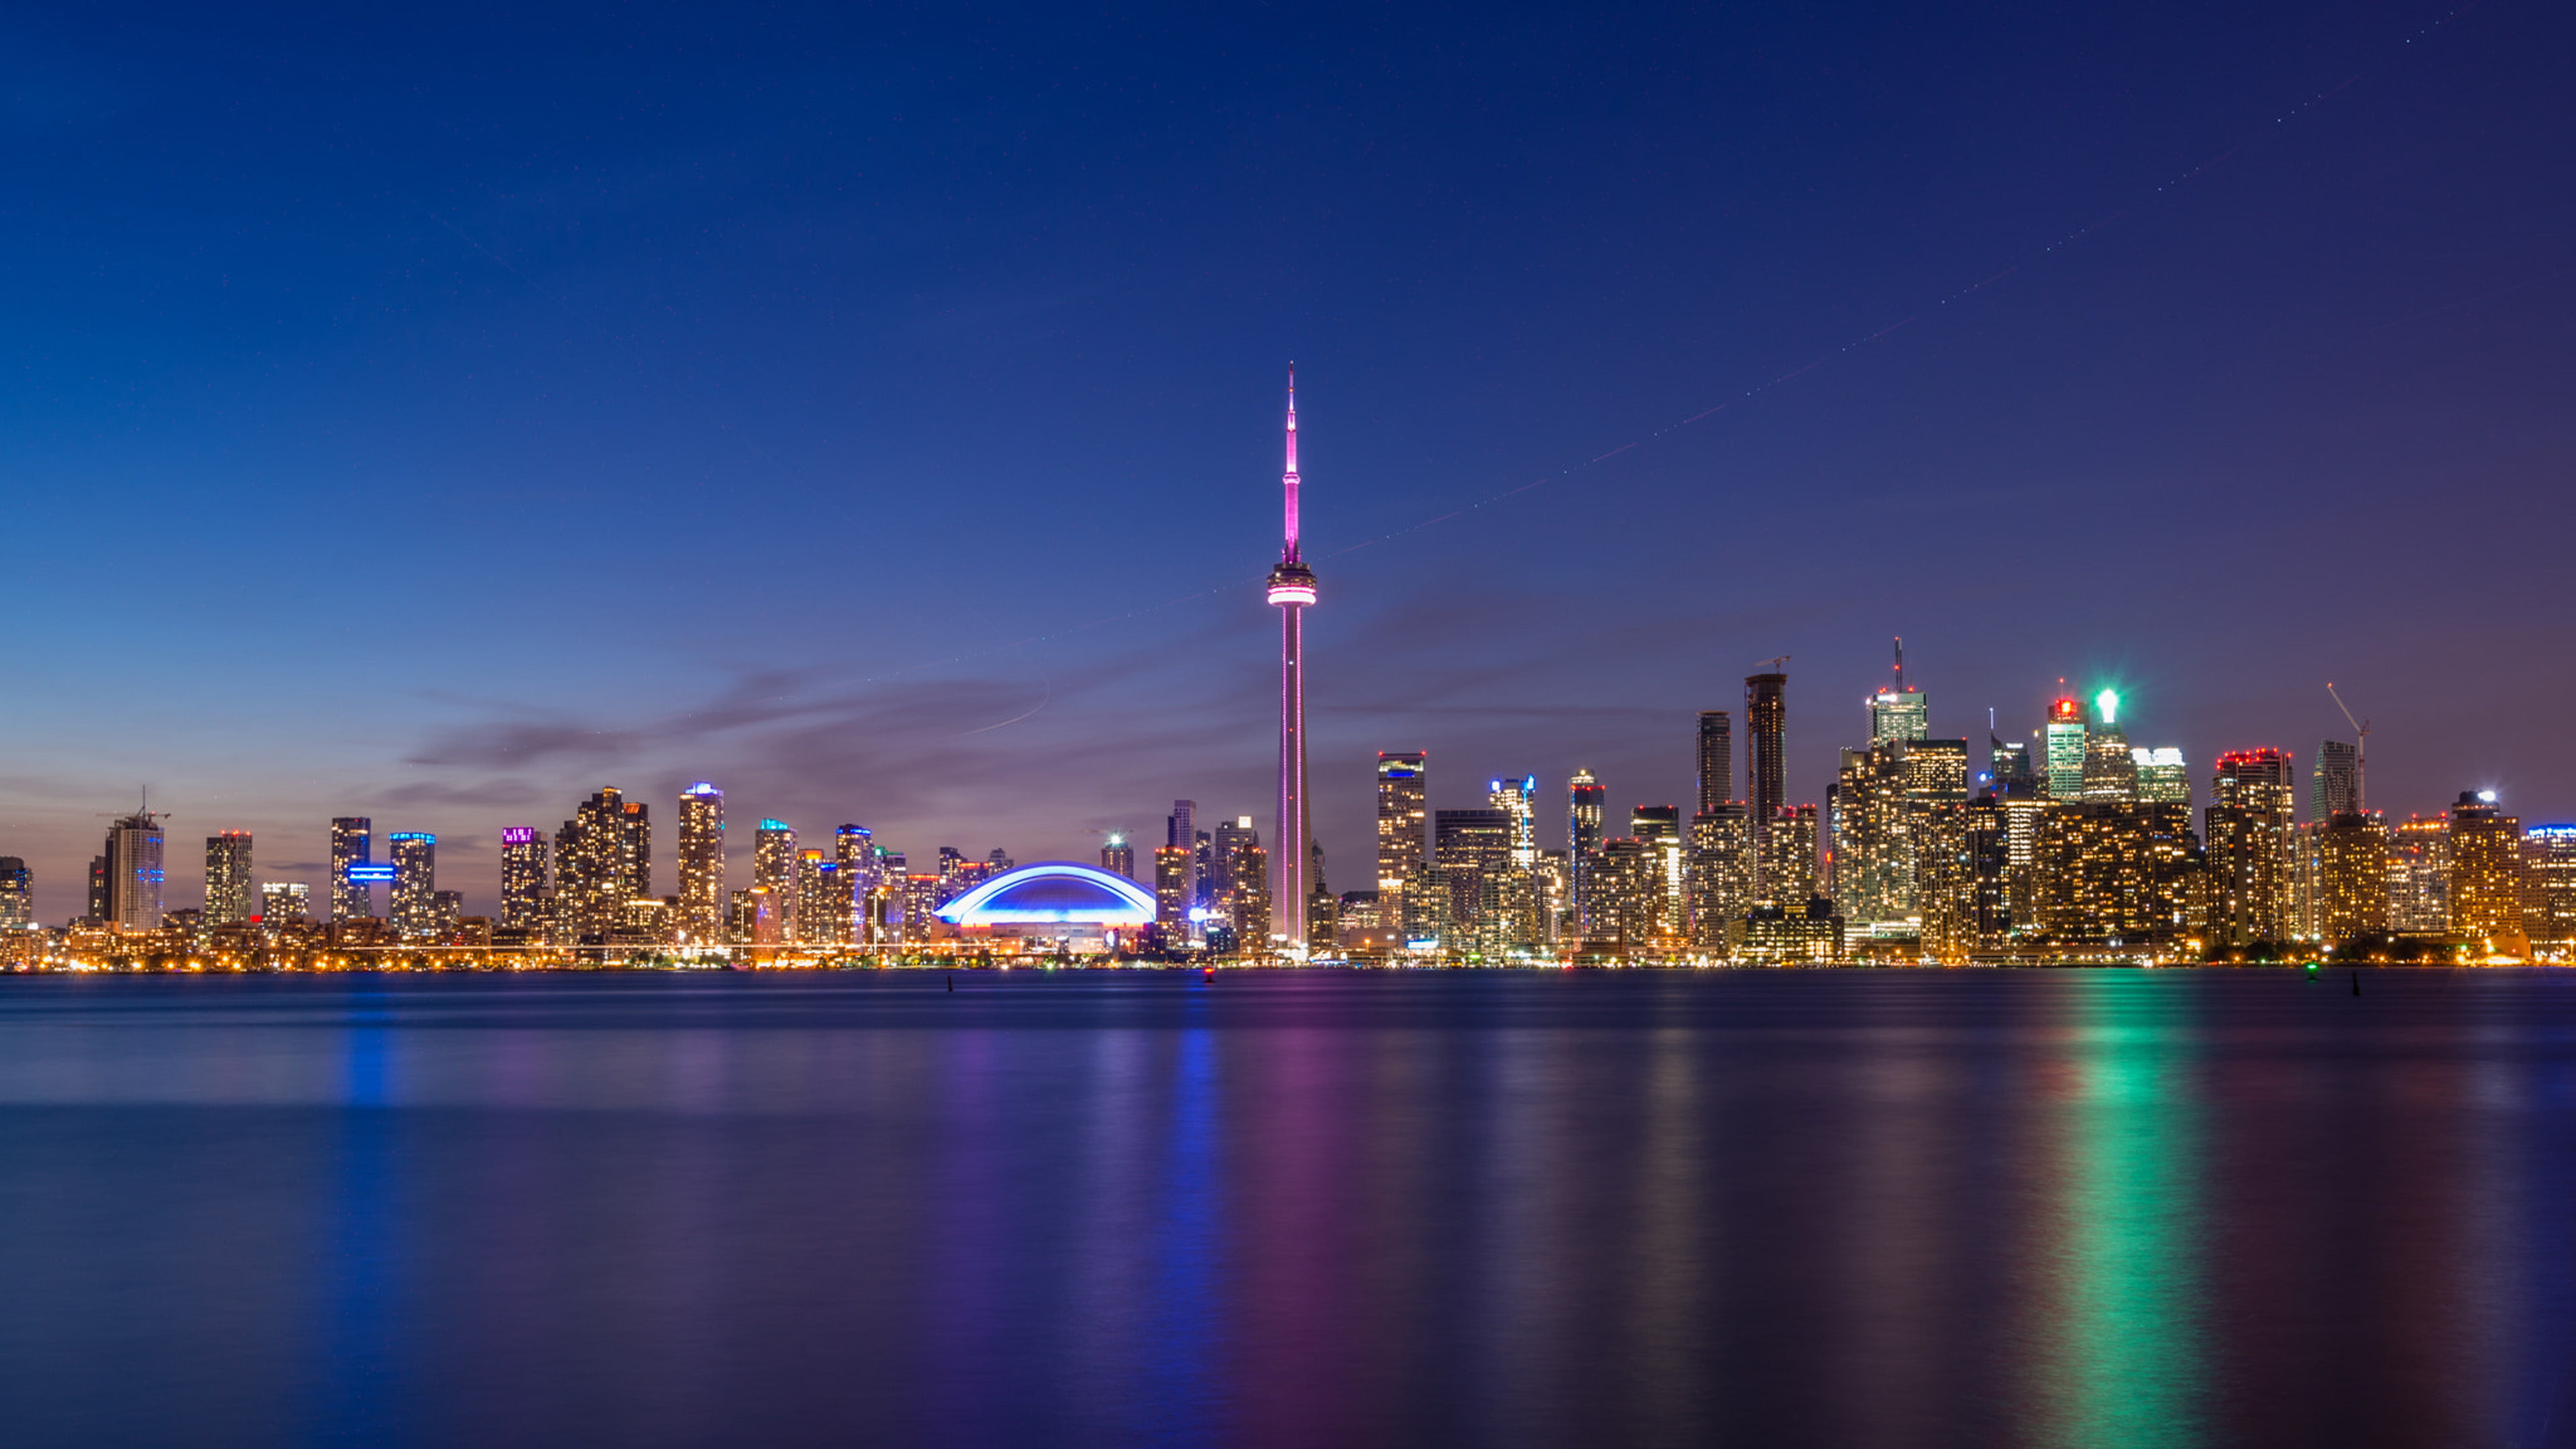 City And Architecture Center On Toronto At Night Canada Summer Hd Wallpapers For Desktop Mobile Phones And Laptop 3840×2160